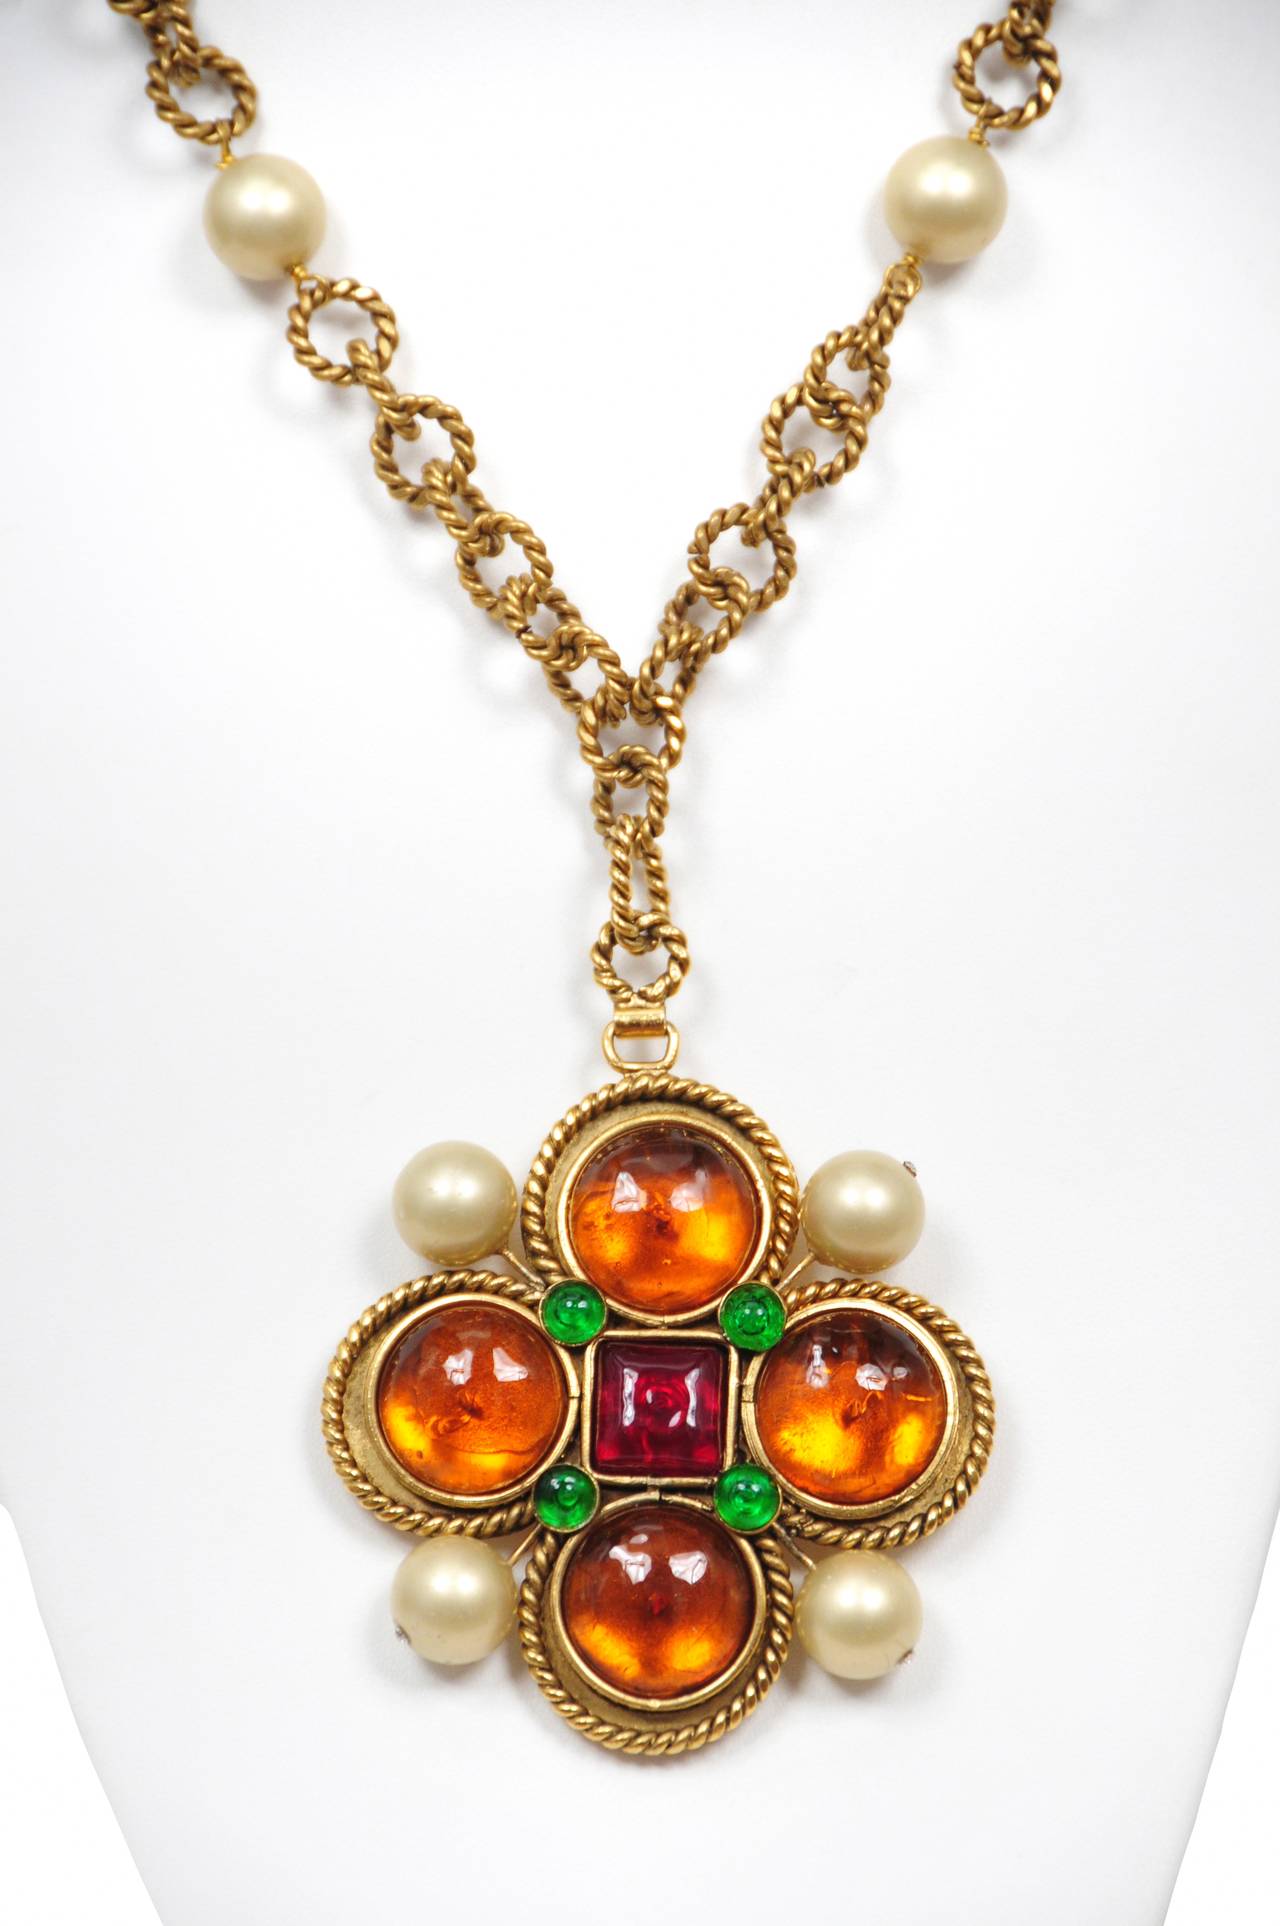 Vintage Chanel orange, burgundy and green gripoix pendant necklace featuring a gold tone rope link chain interlocked with faux pearls.

Chain length 10